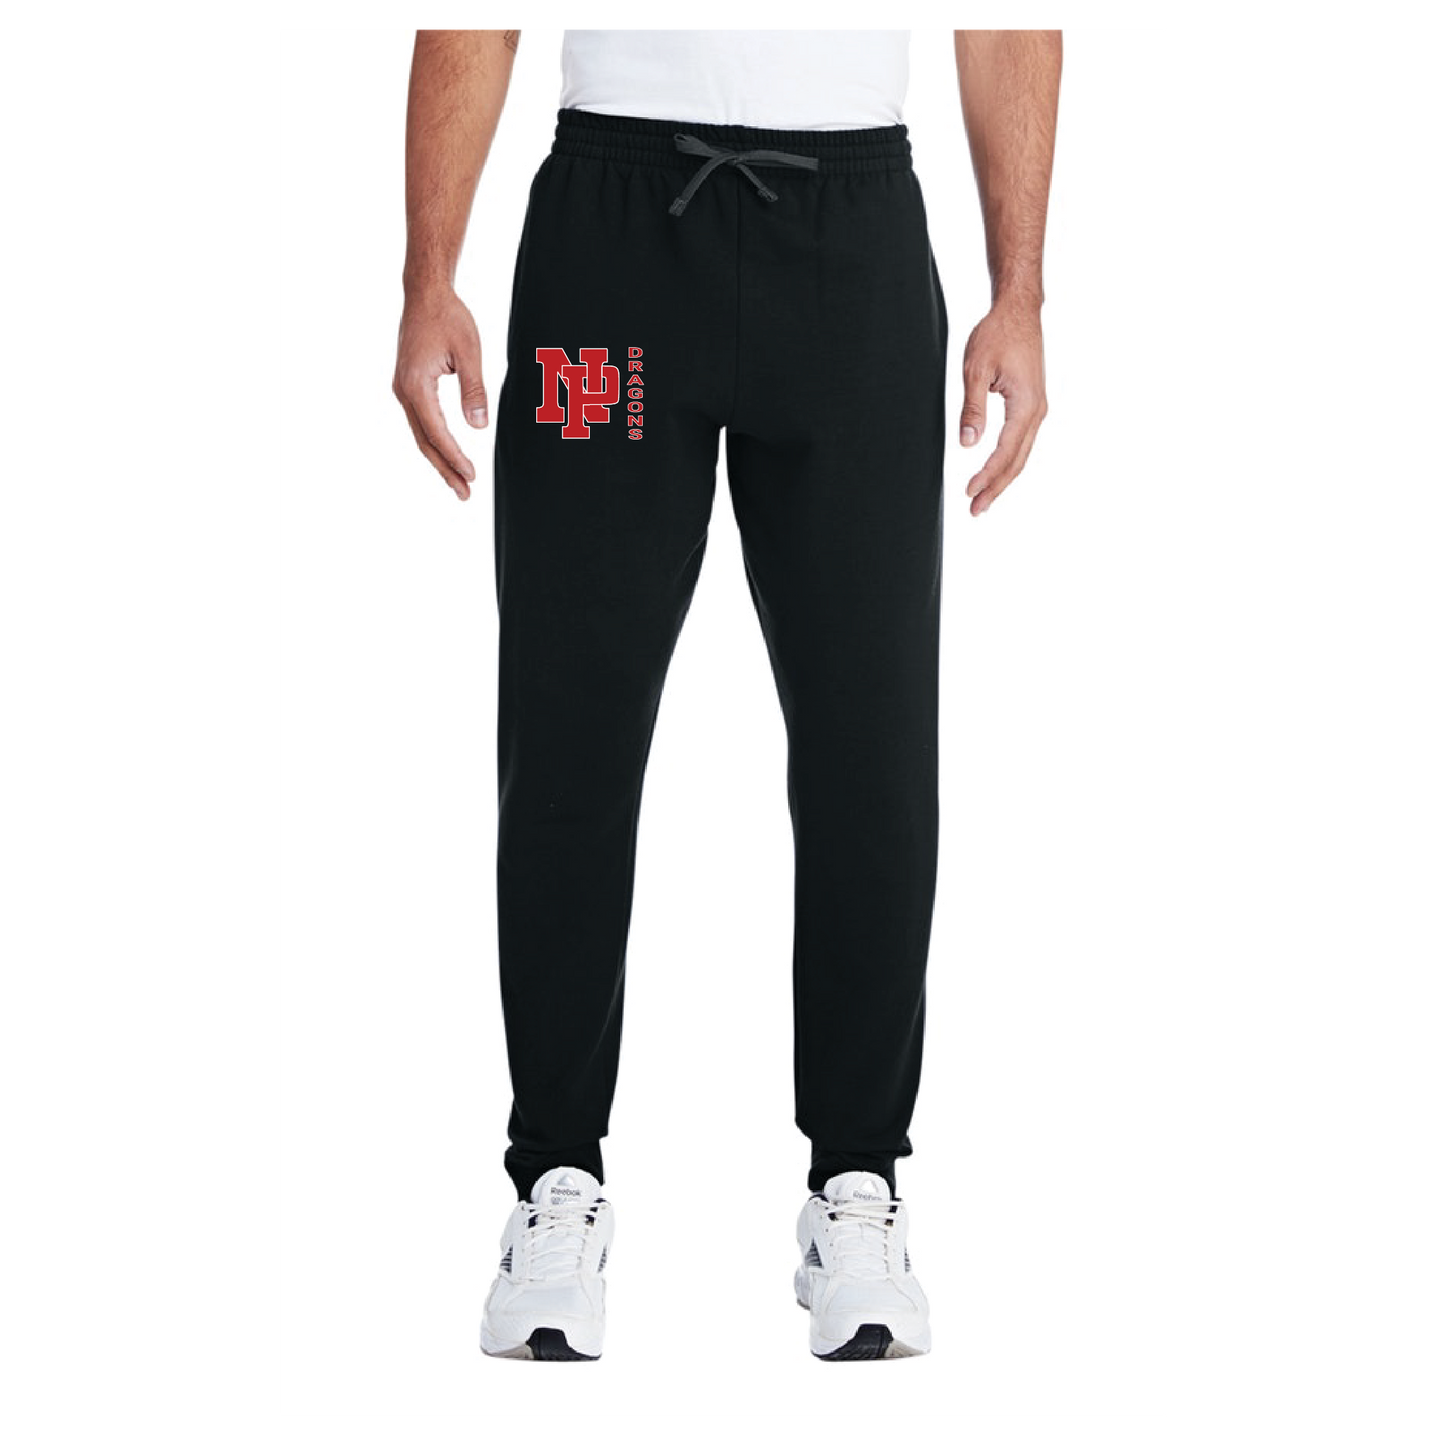 Adult Unisex Joggers - Red NP Dragons, Side by Side